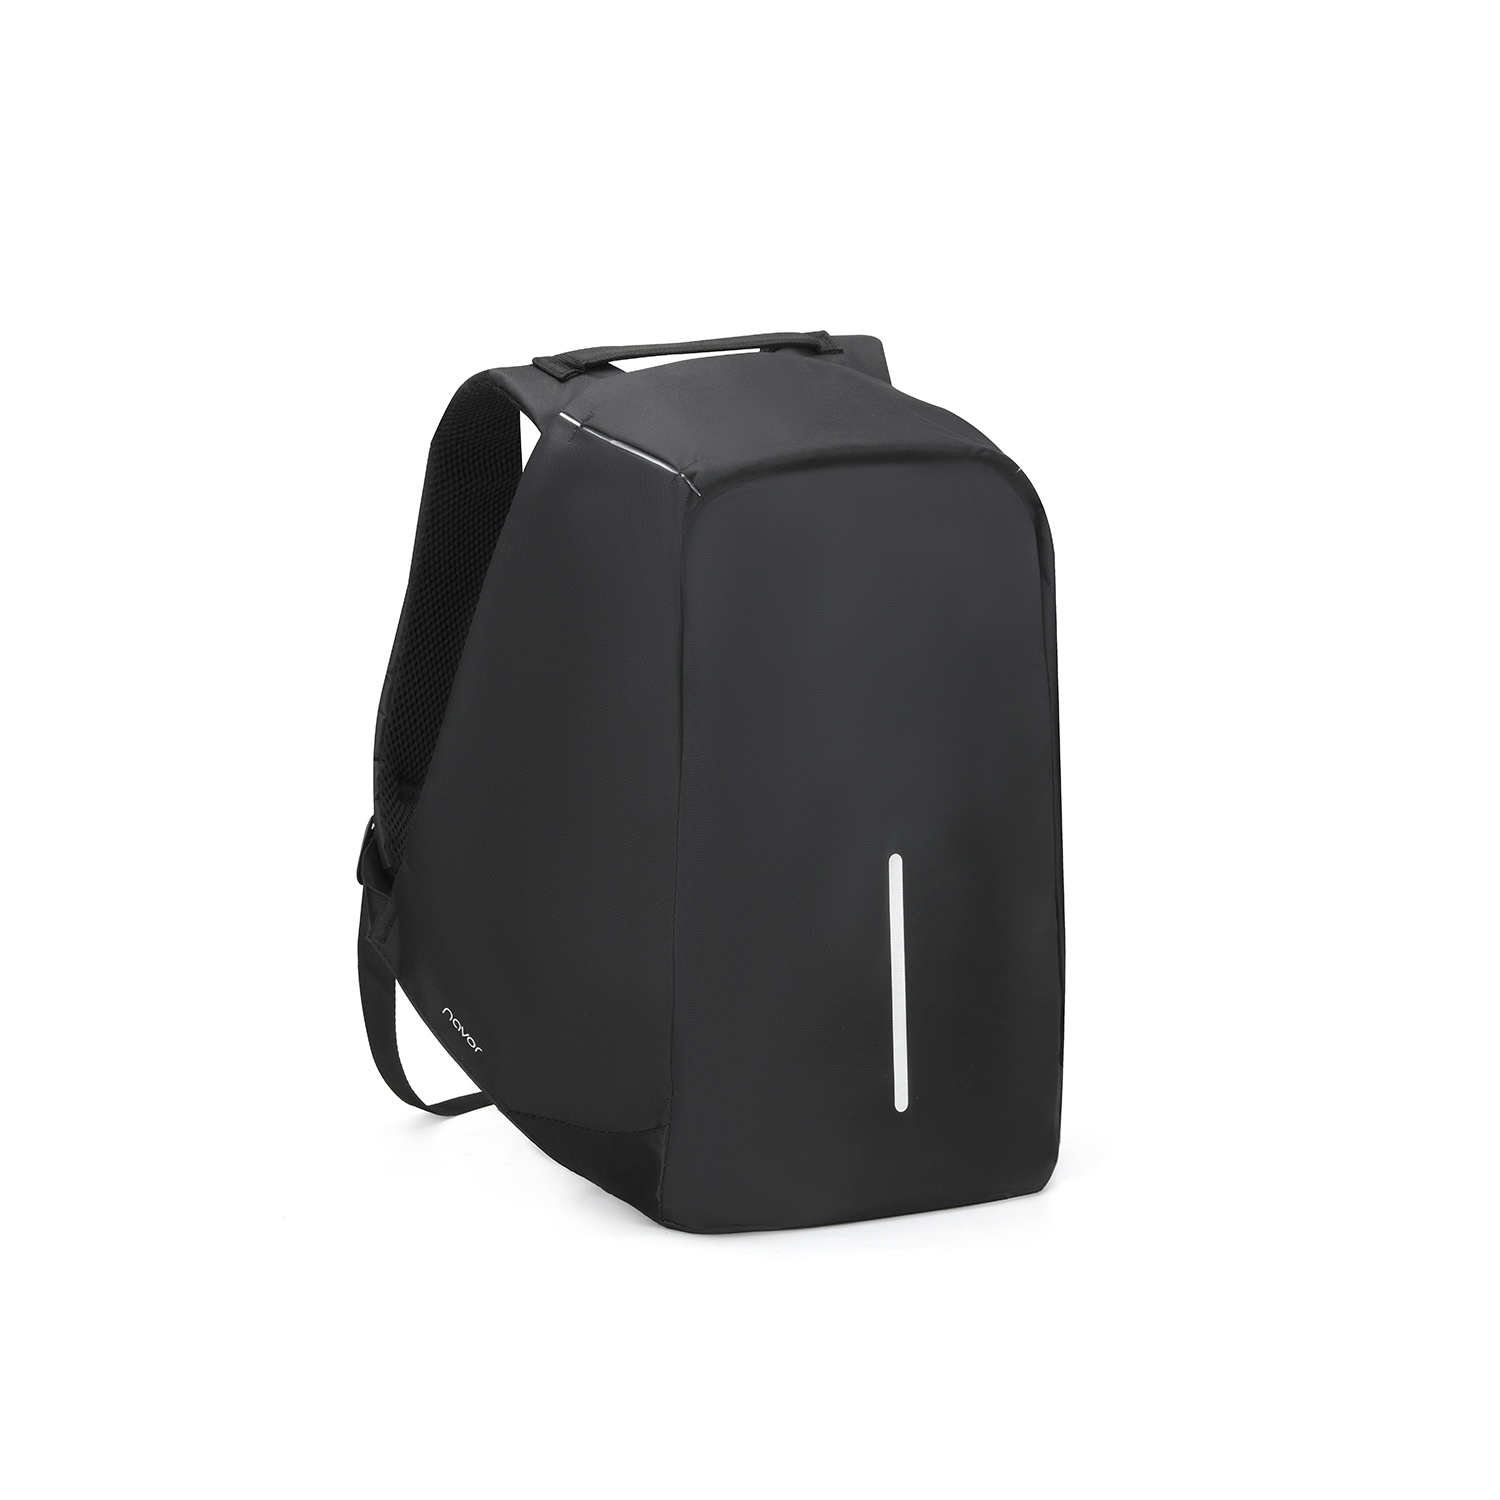 Anti-theft With USB Charging Port / Light-weight Student Functional Business Laptop Backpack For Men / Women -Black